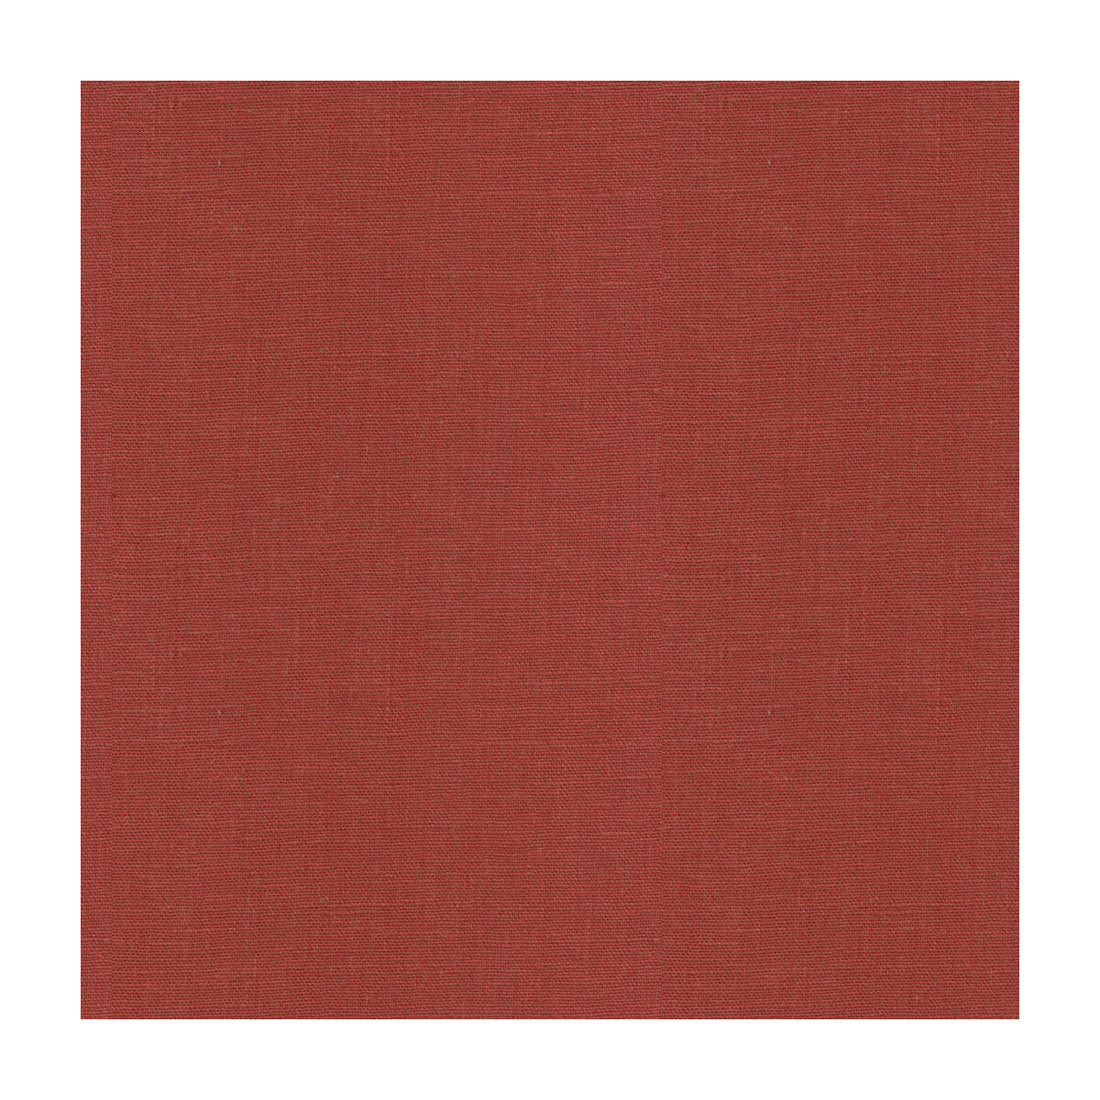 Dublin fabric in brick color - pattern 32344.97.0 - by Kravet Basics in the Perfect Plains collection